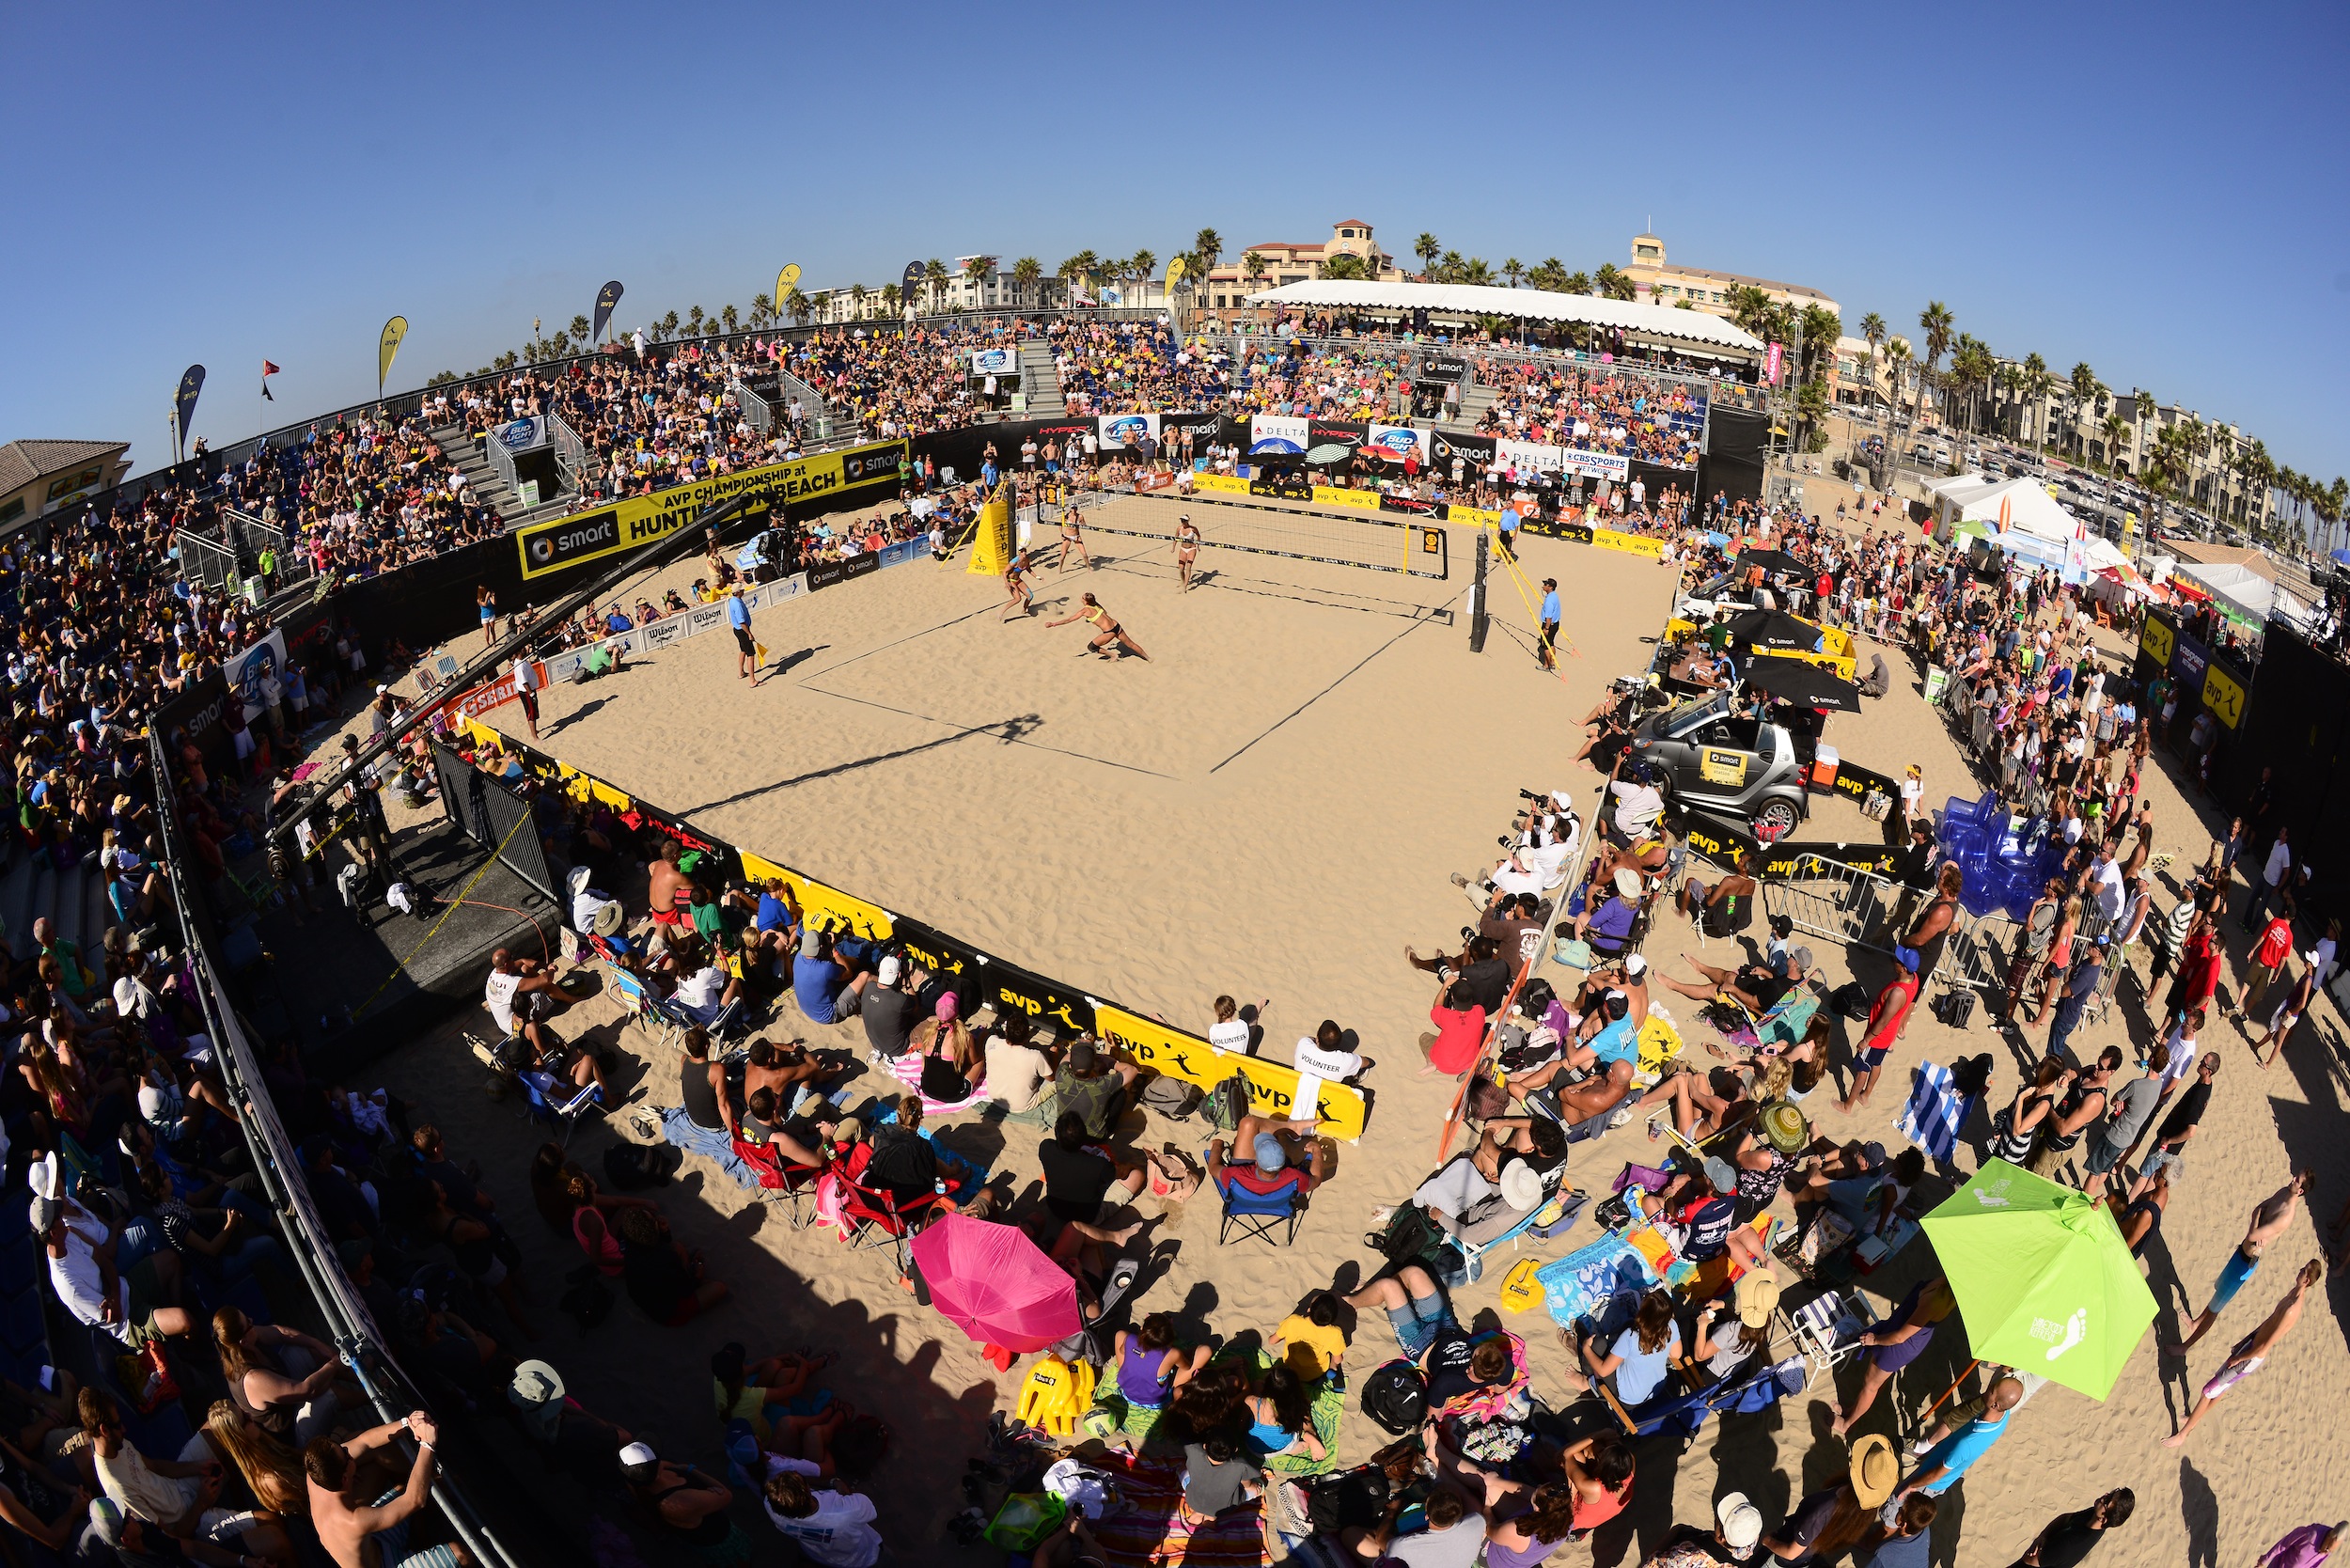 The AVP Championships at Huntington Beach presented by smart and